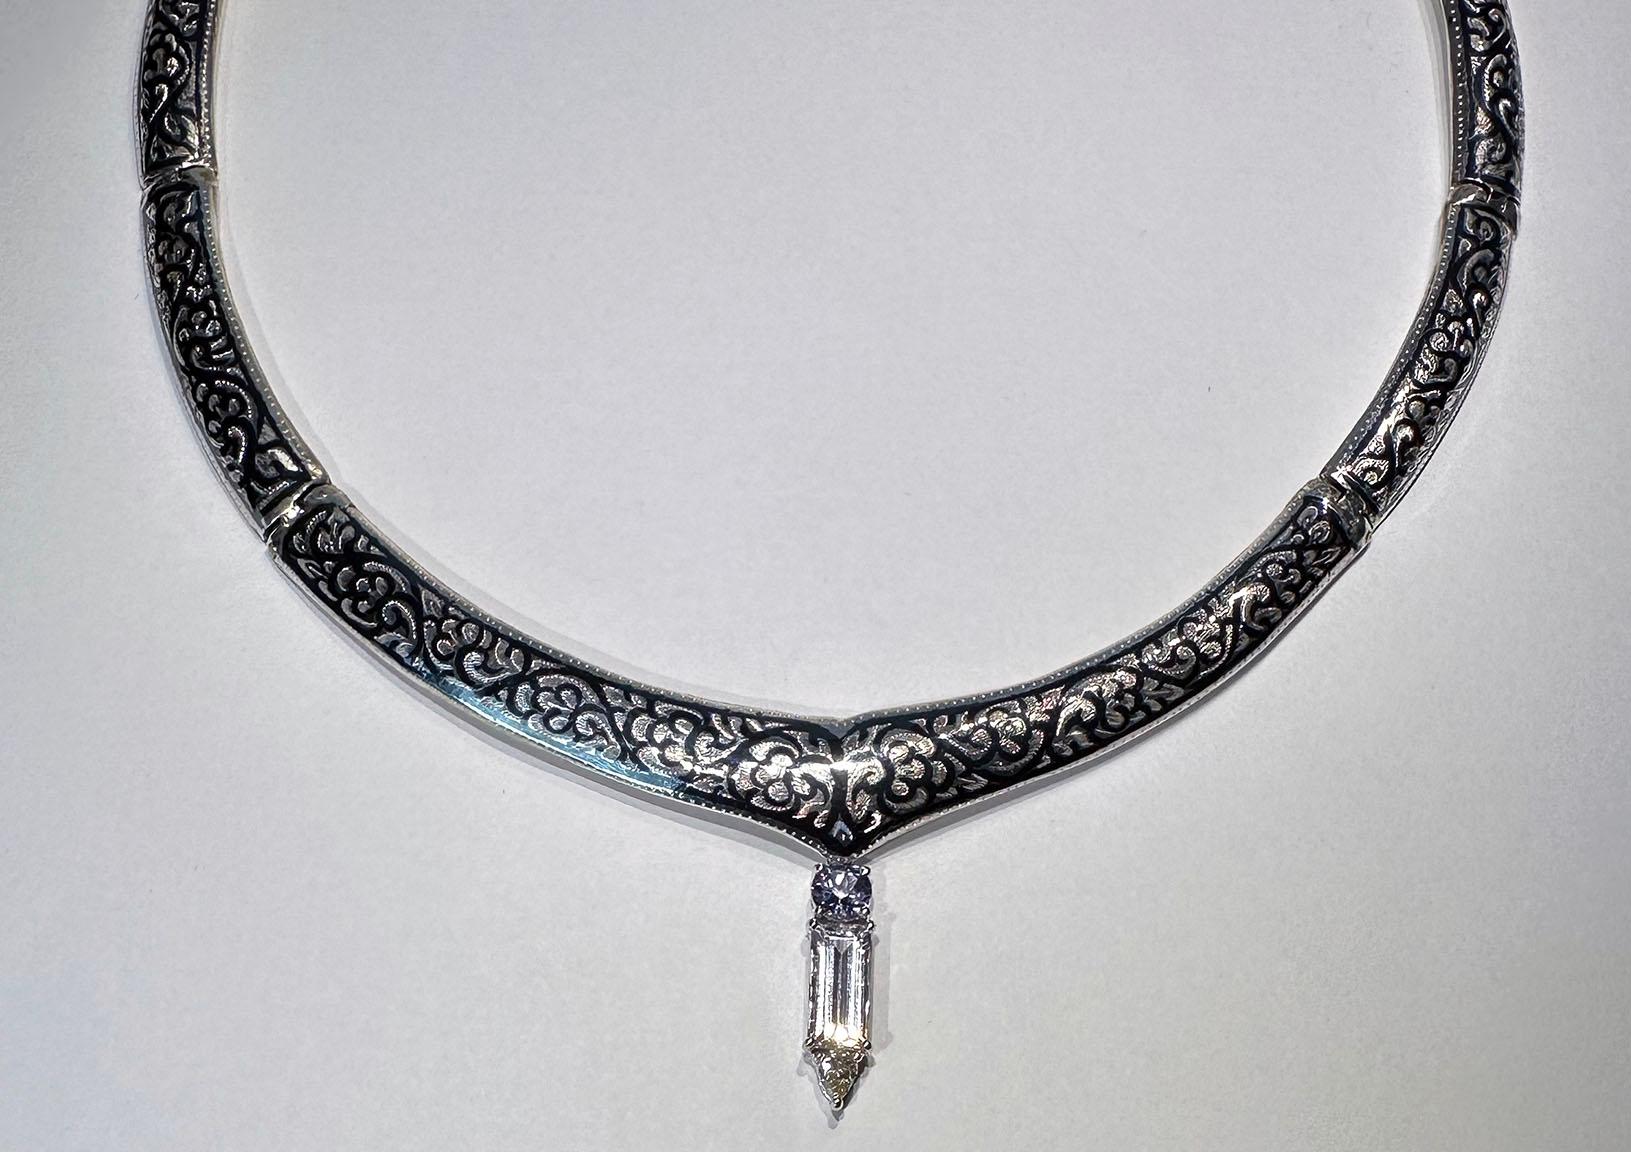 A Silver Nielloware Necklace with a removable White Gold Jeweled Pendant For Sale 2